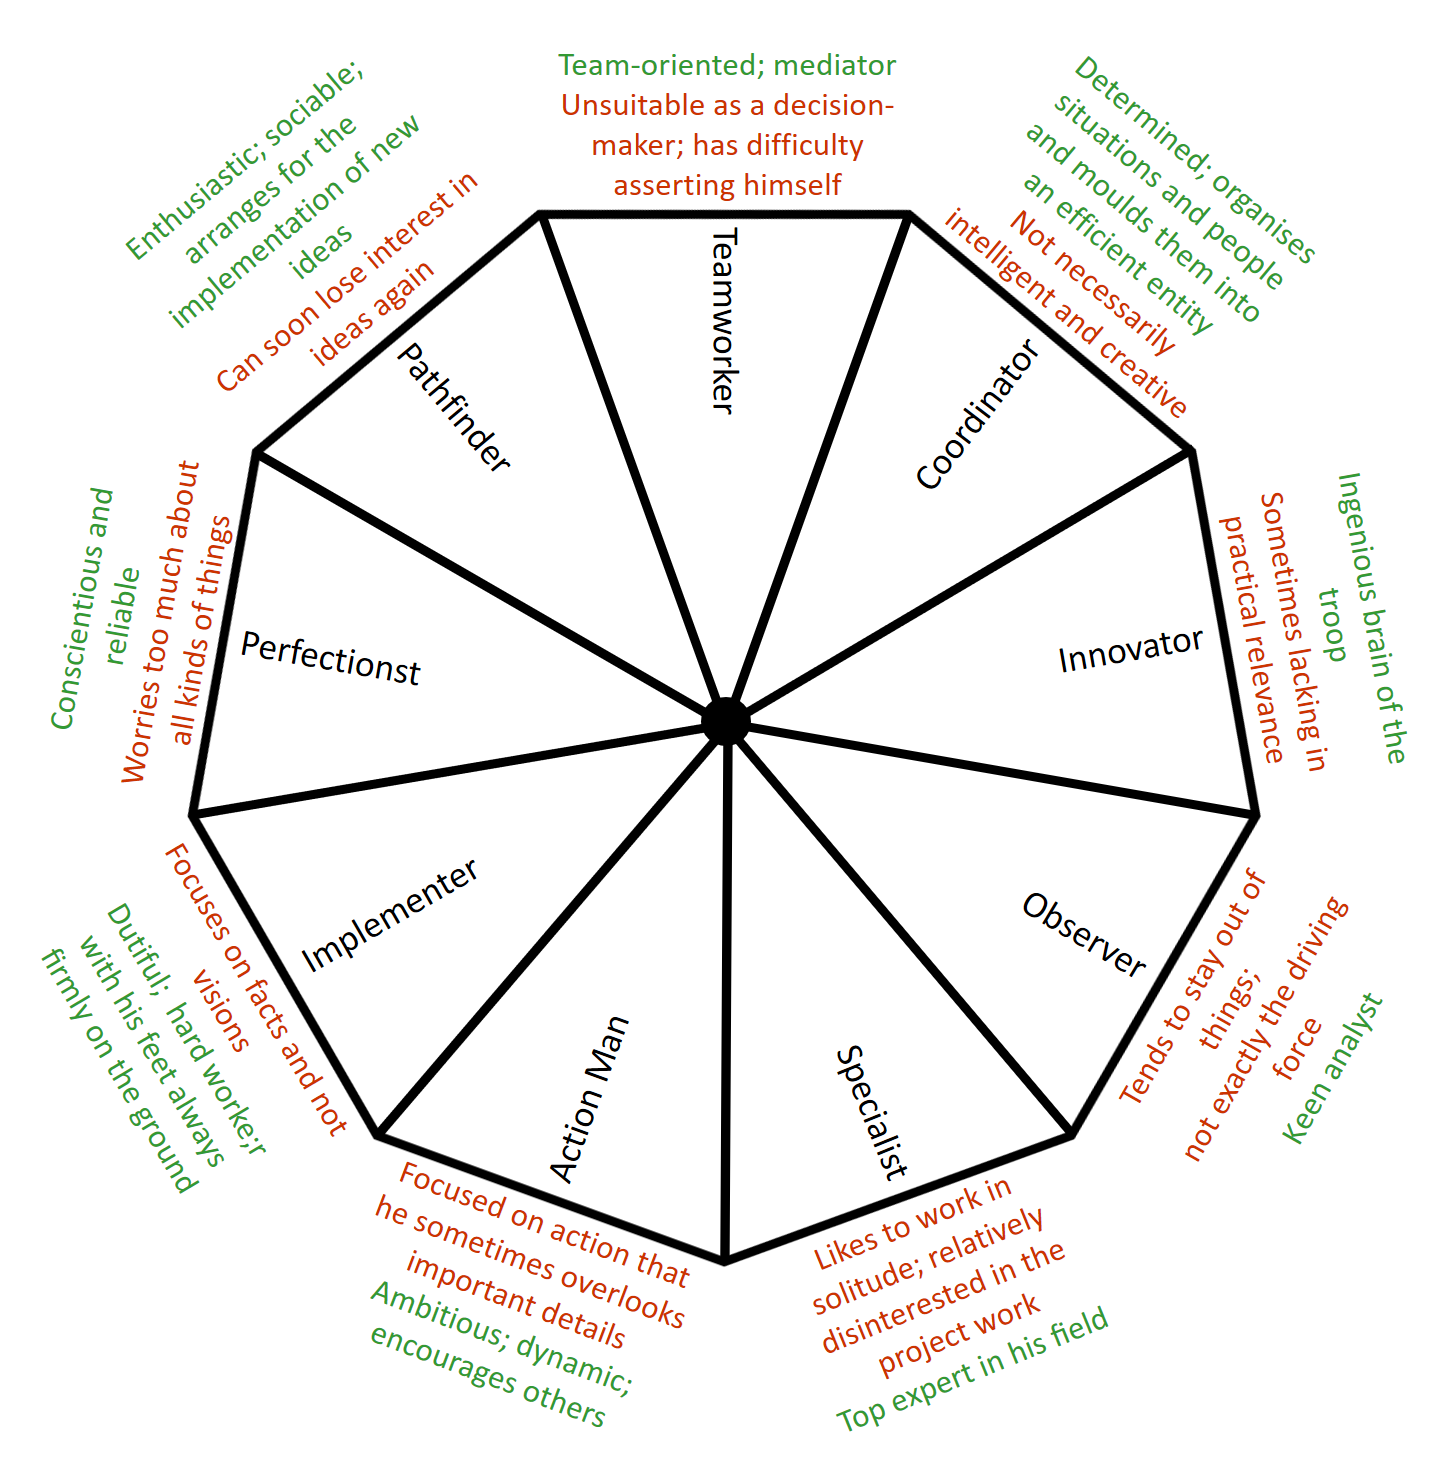 Belbin's model is known for nine different roles which are needed by every team.